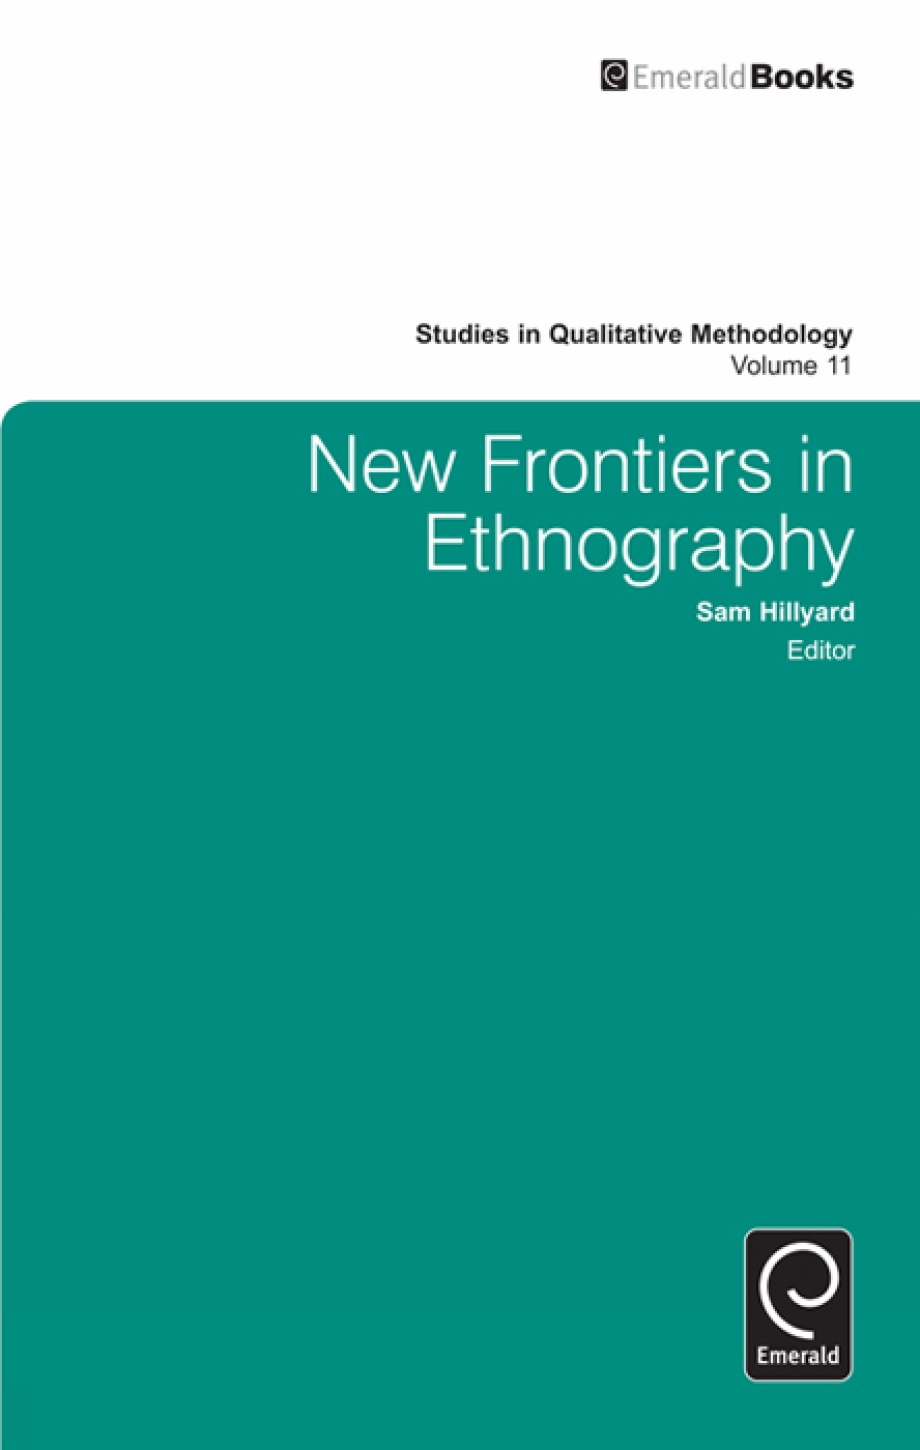 New Frontiers in Ethnography - Sam Hillyard